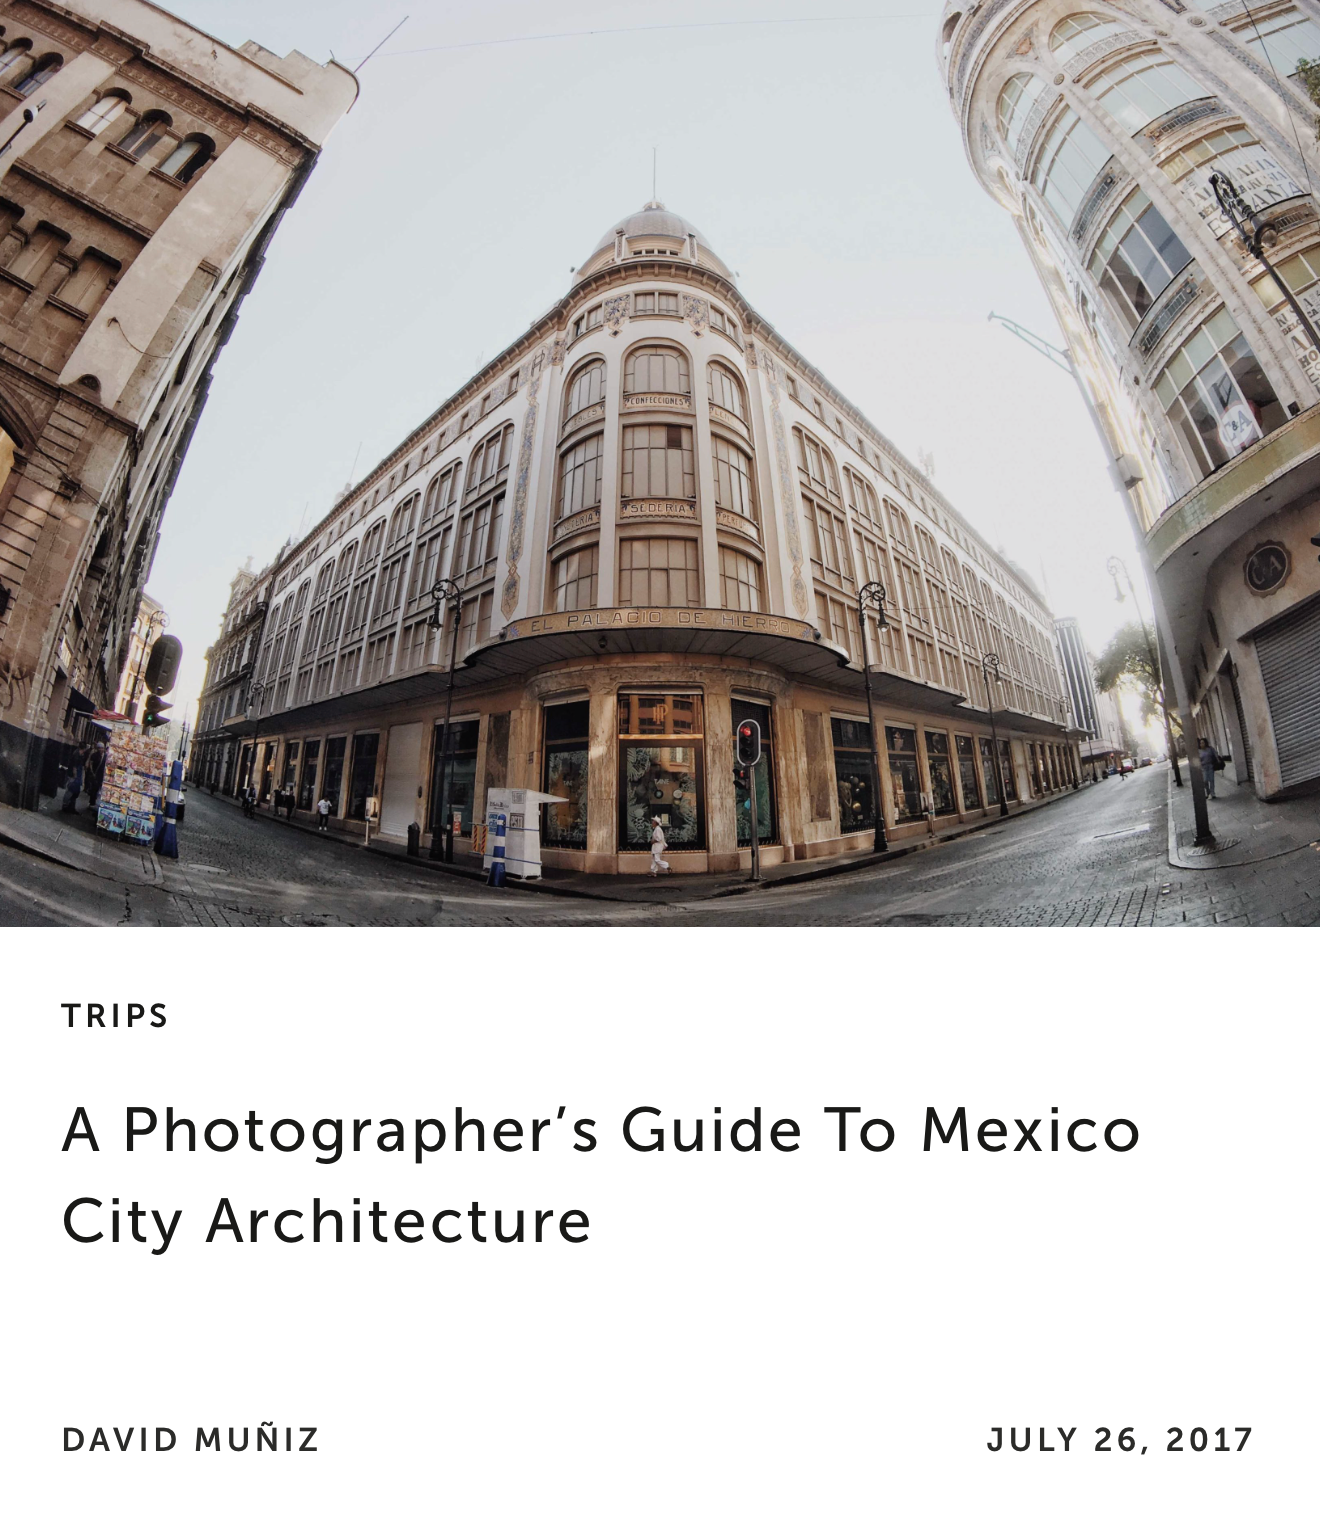 A Photographer’s Guide to Mexico City Architecture, by Moment.